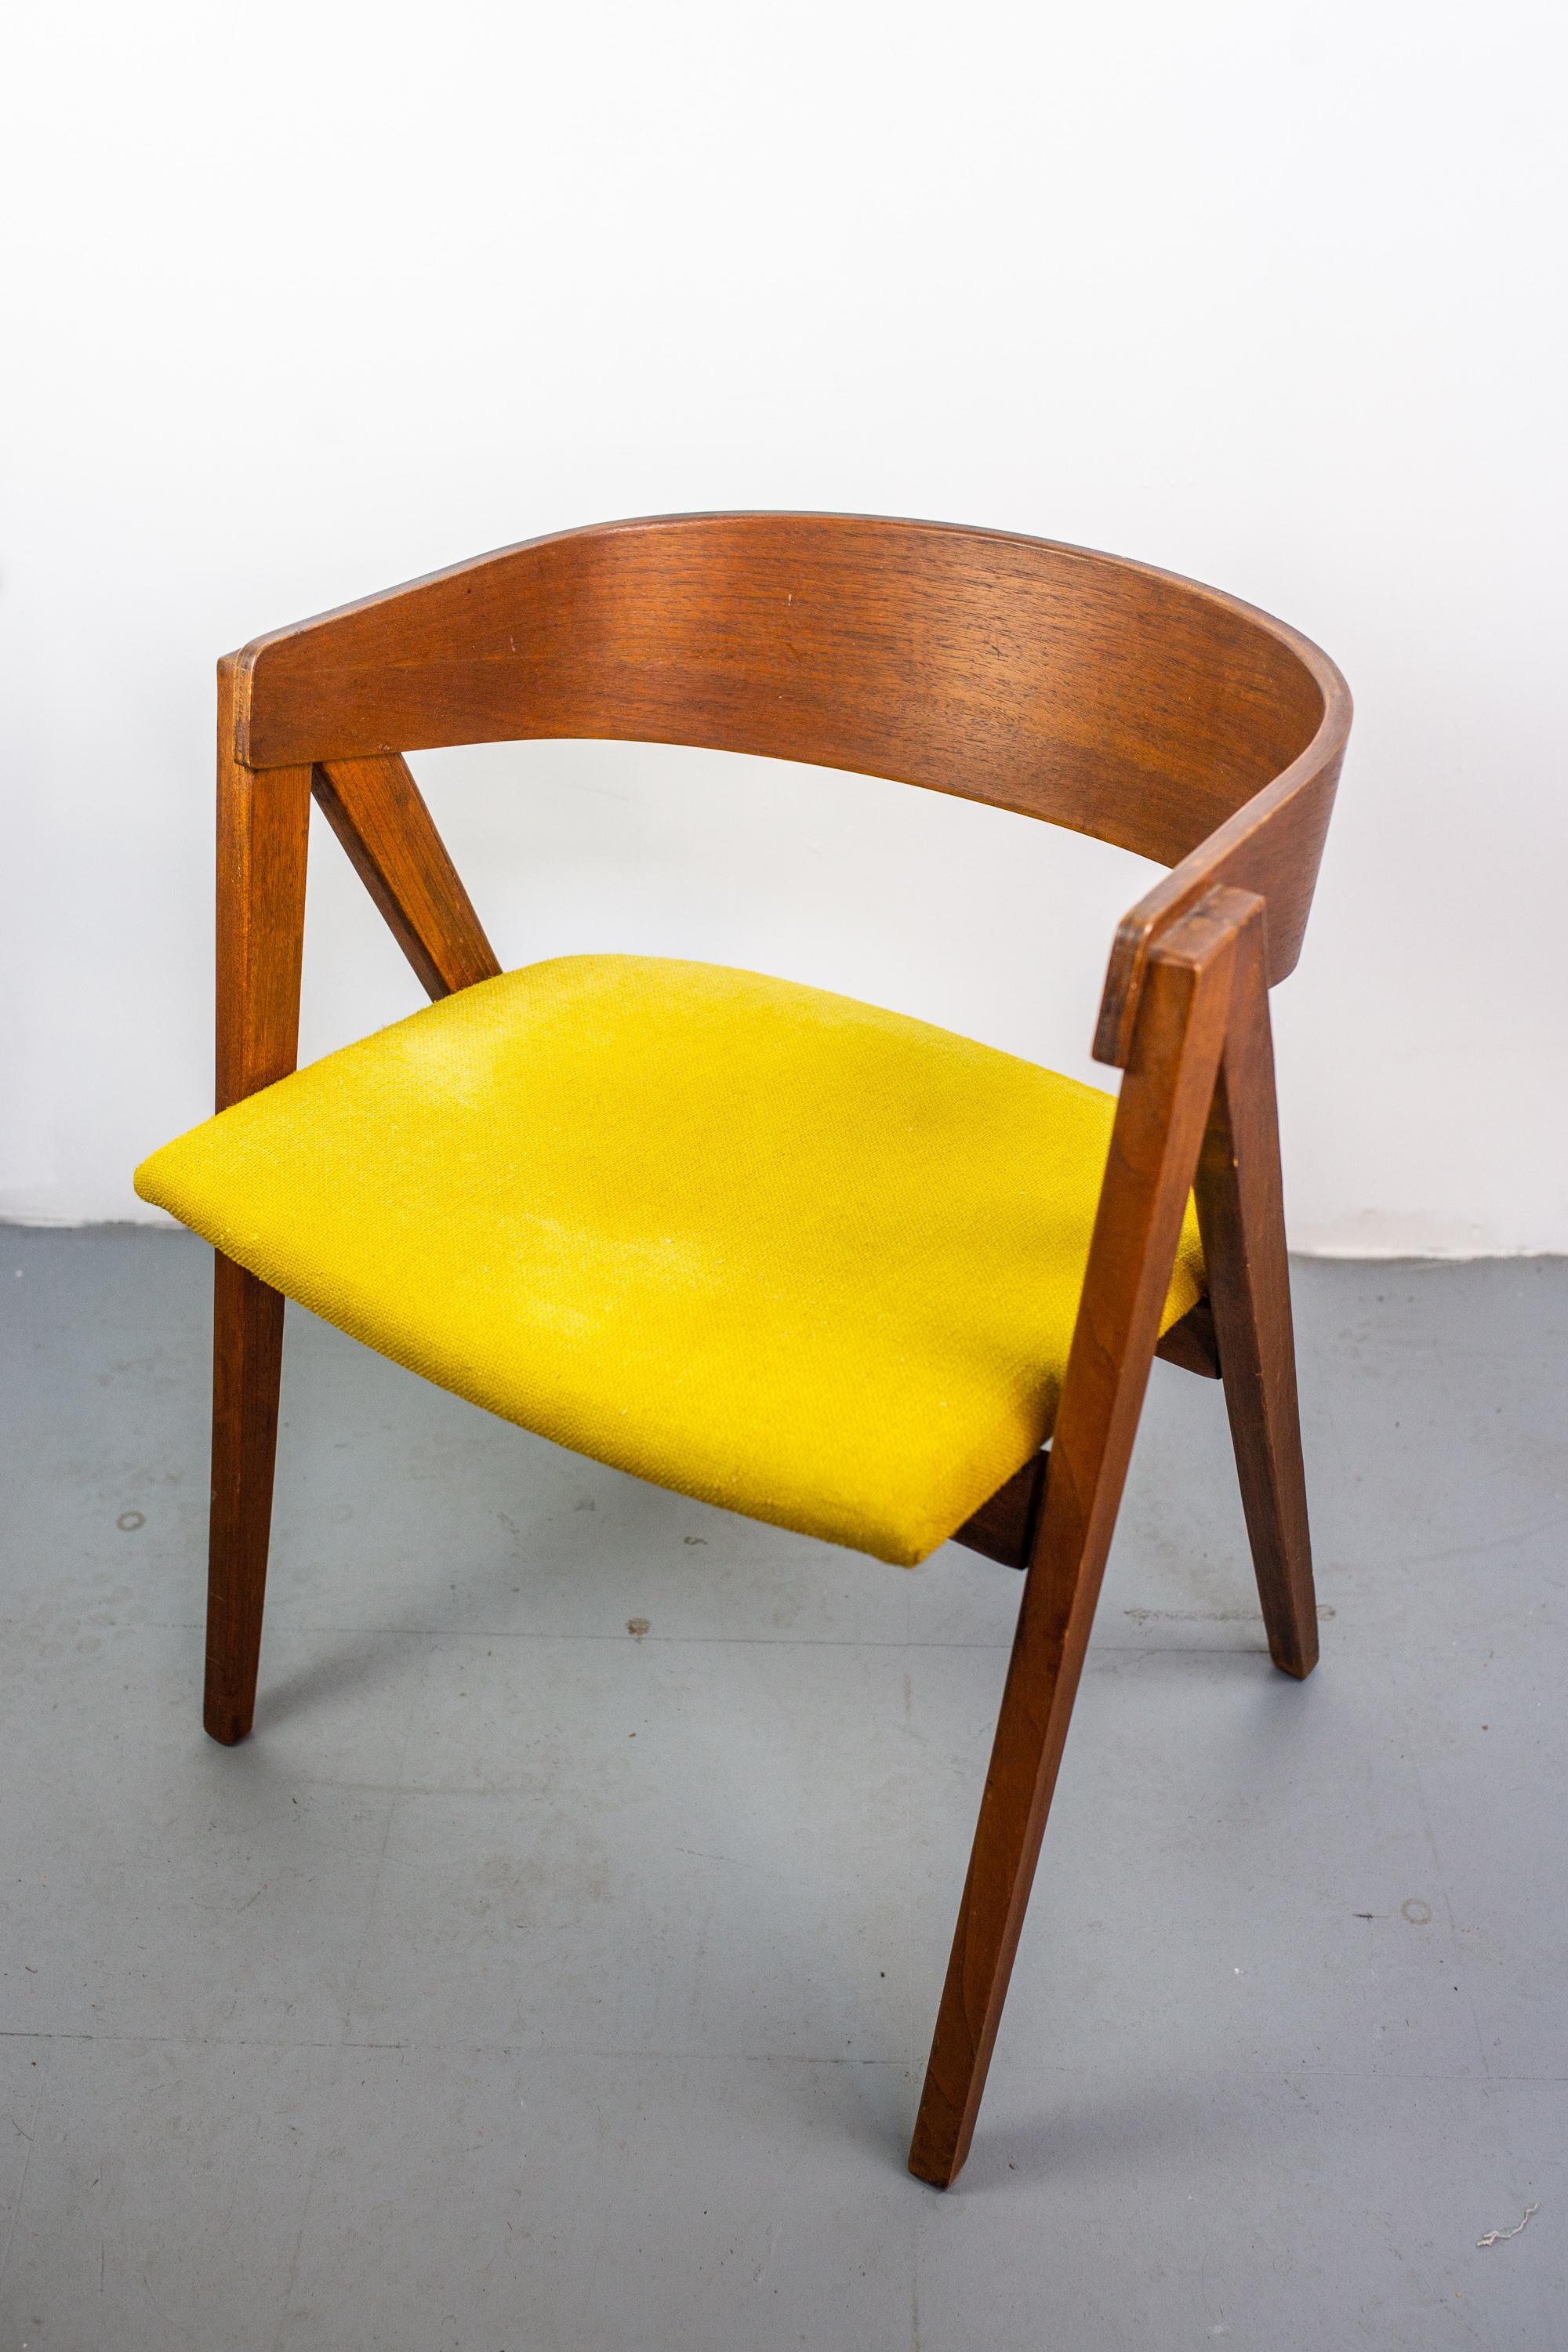 Wooden chair 'Compass Chair', designed in 1950s by Allan Gould in US.
American Mid-Century Modern design with a Scandinavian look.
Made of wood and upholstered seat in a yellow fabric.